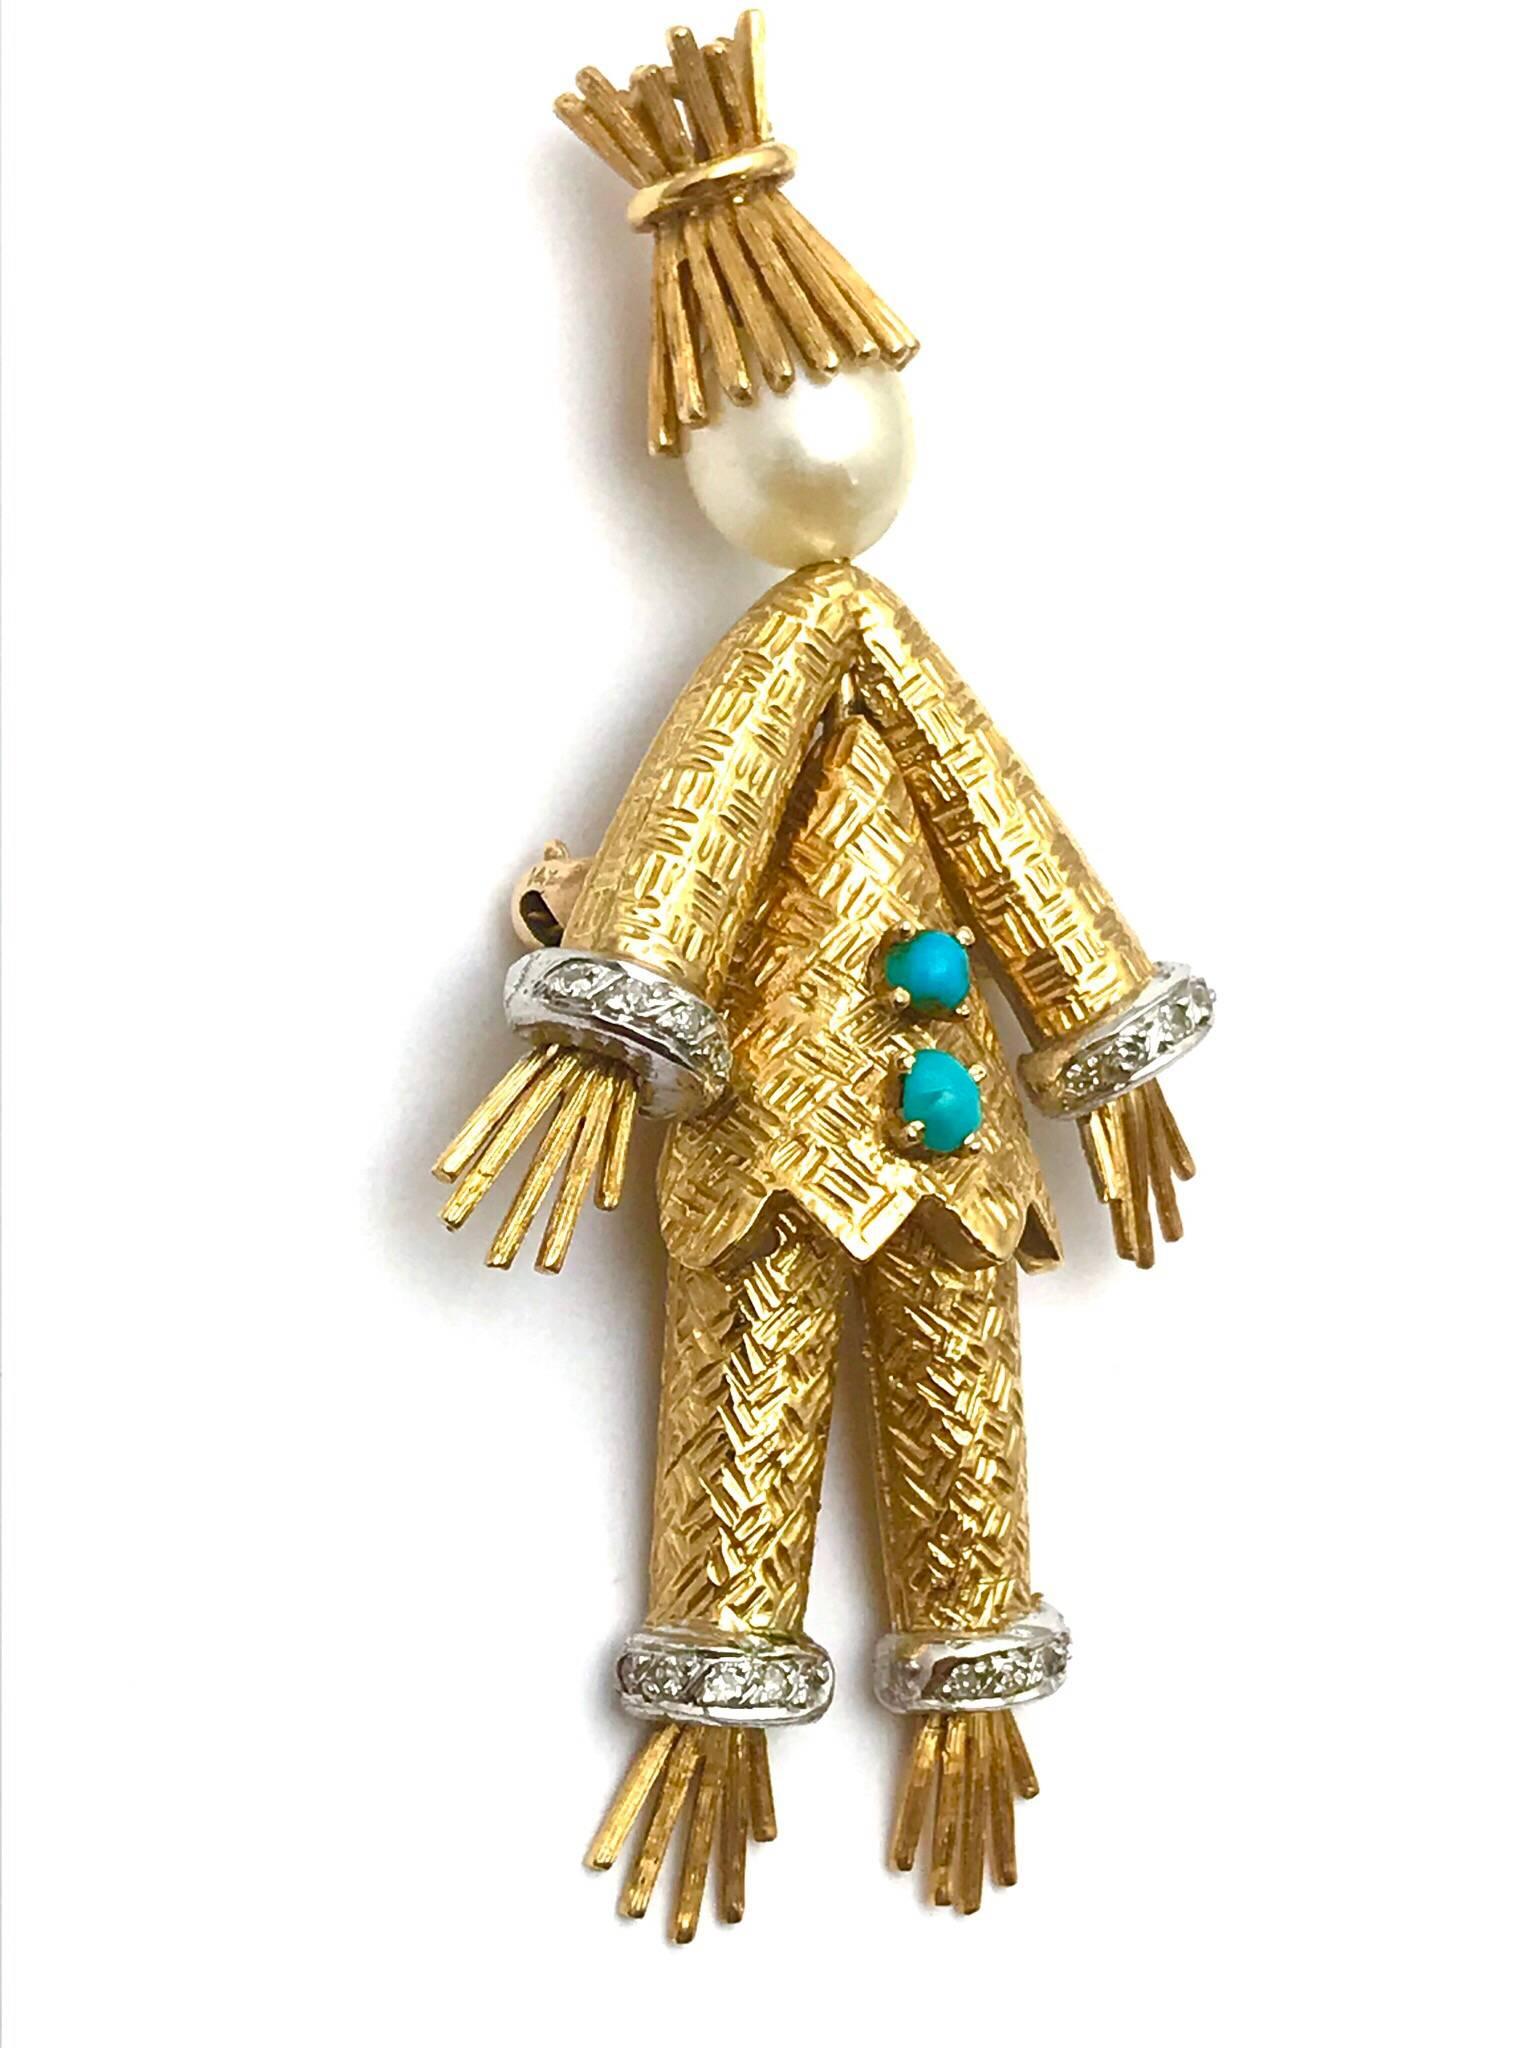 A Cherny cultured pearl, diamond and turquoise 18 karat yellow gold scare crow brooch.  The scare crow is wearing a textured gold suit, with diamond cuffs on the arms and pant legs, a straw hat, with straw hands and feet, and two turquoise buttons